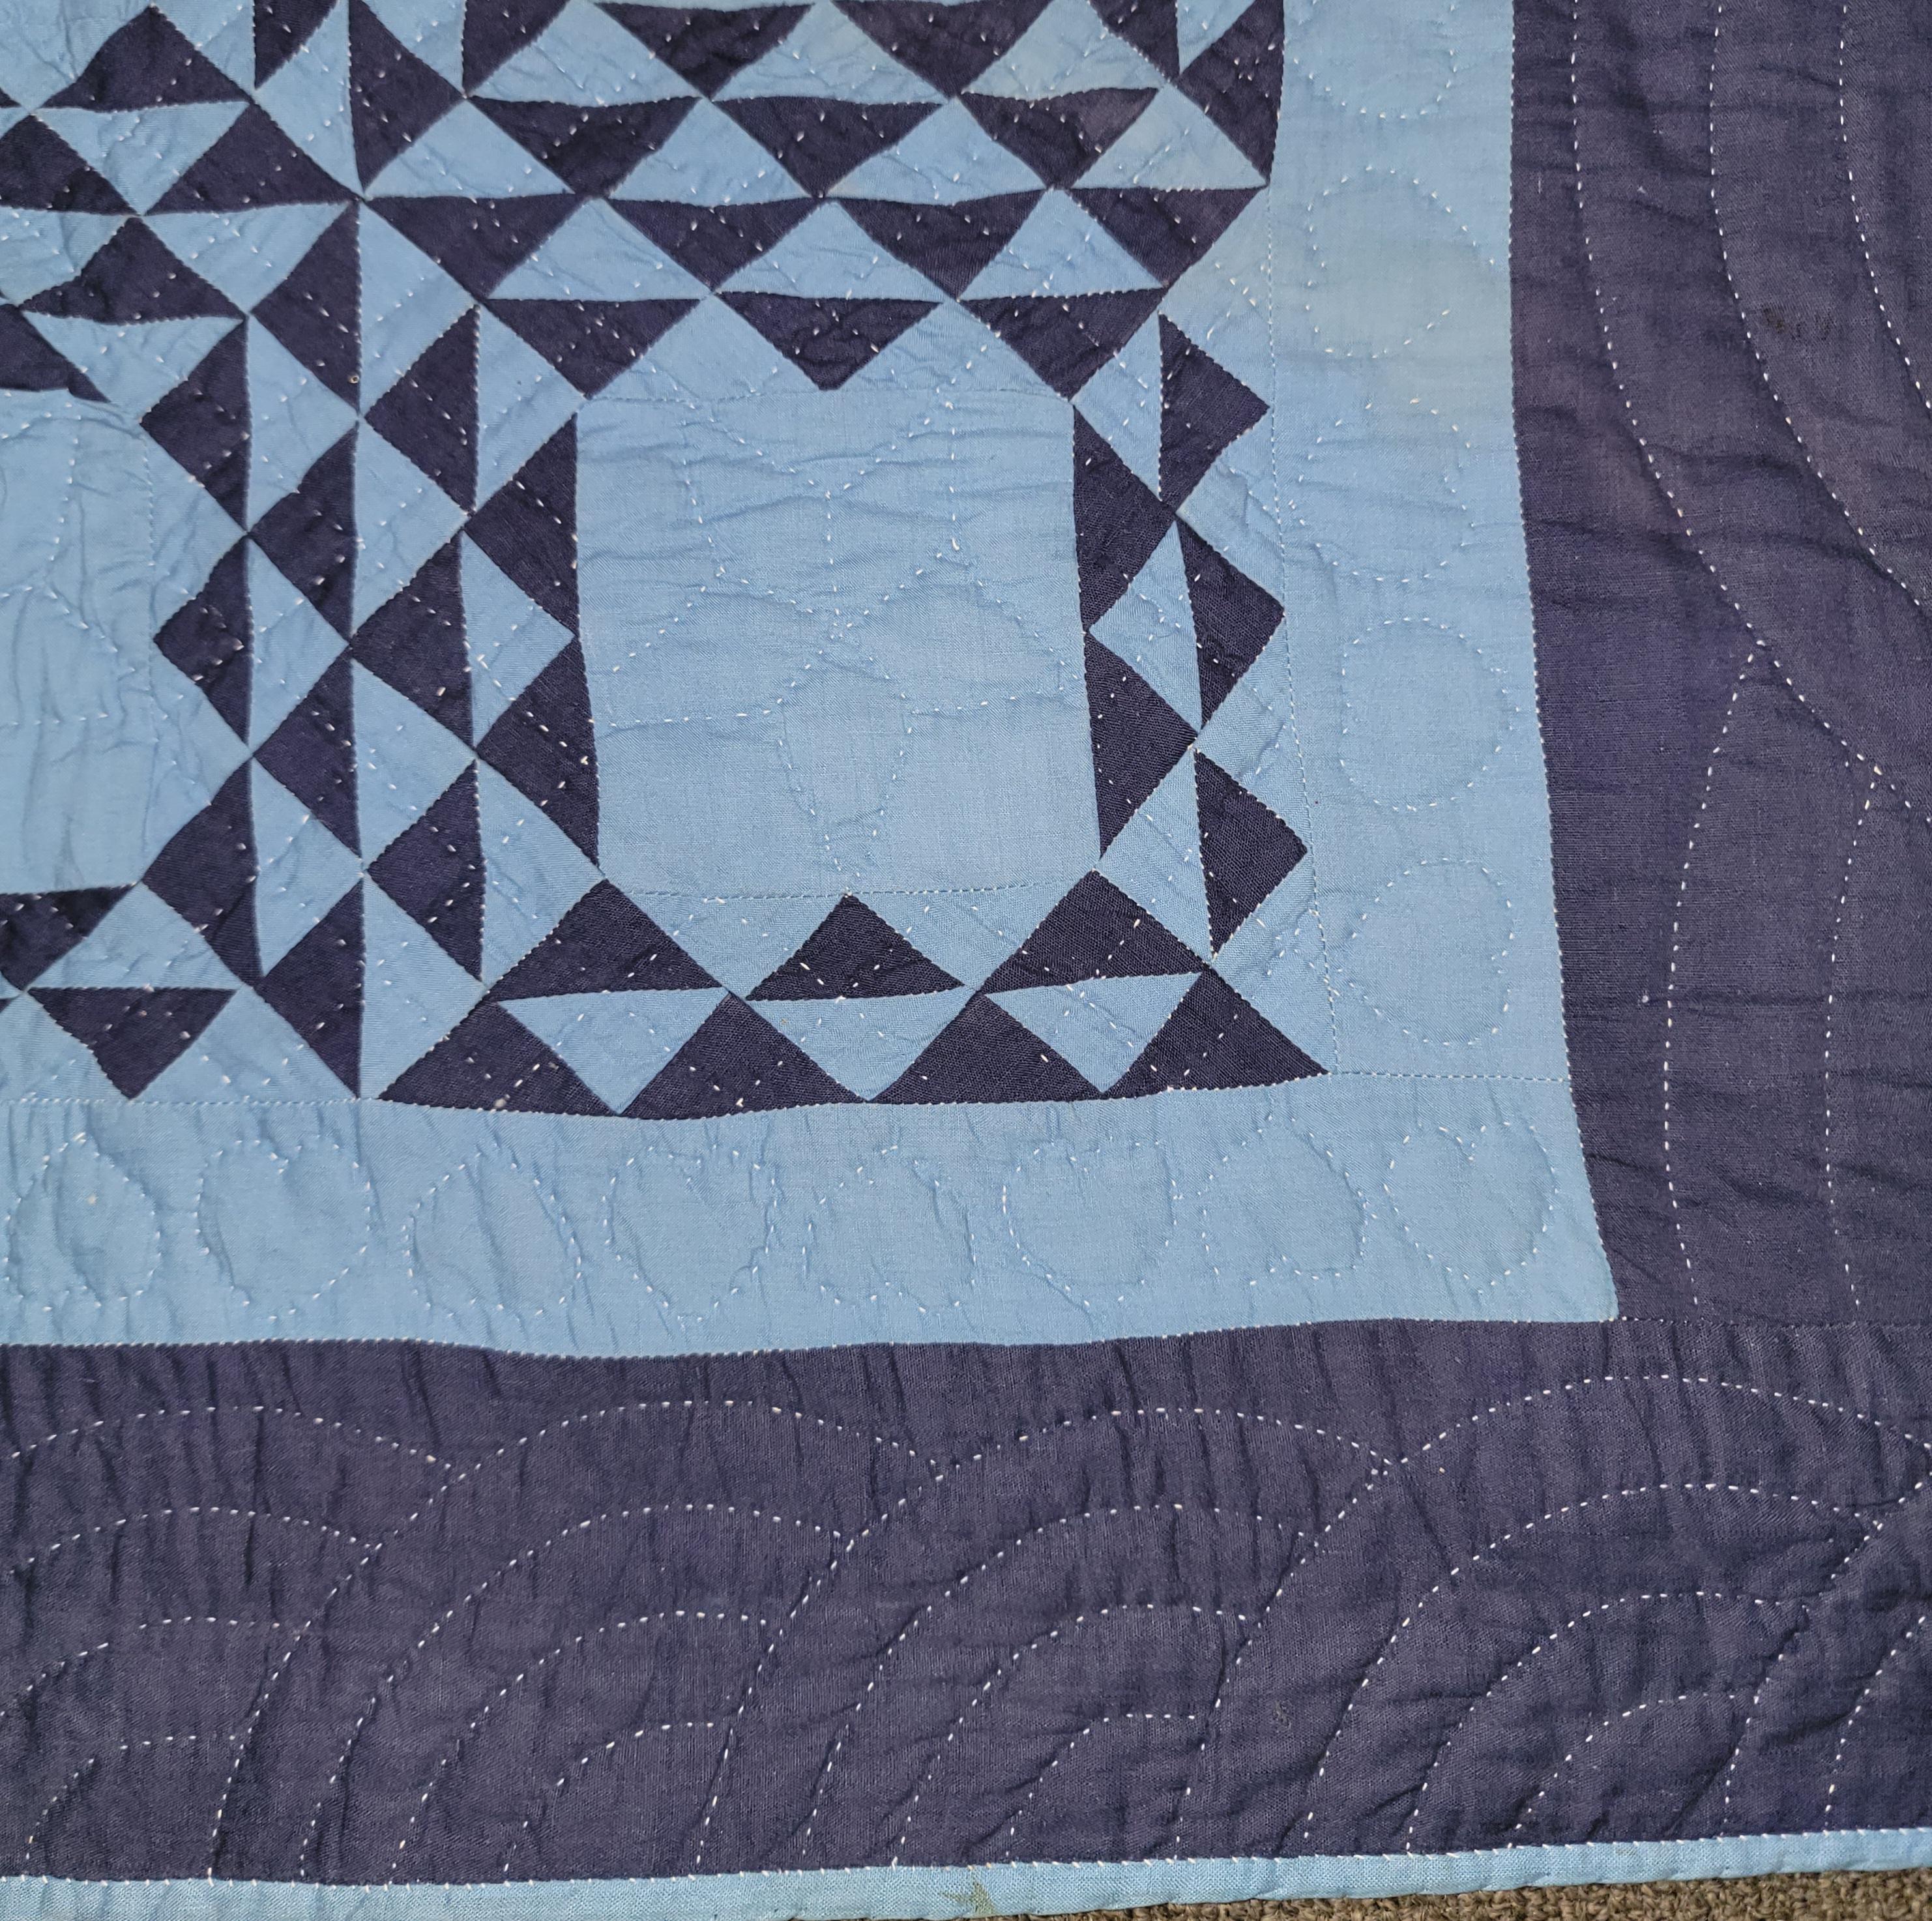 20Thc Ohio Amish crib quilt in ocean waves pattern.The back round a royal blue and light blue small pieces. The condition is very good.This is a rare and fine pattern from the mid West.